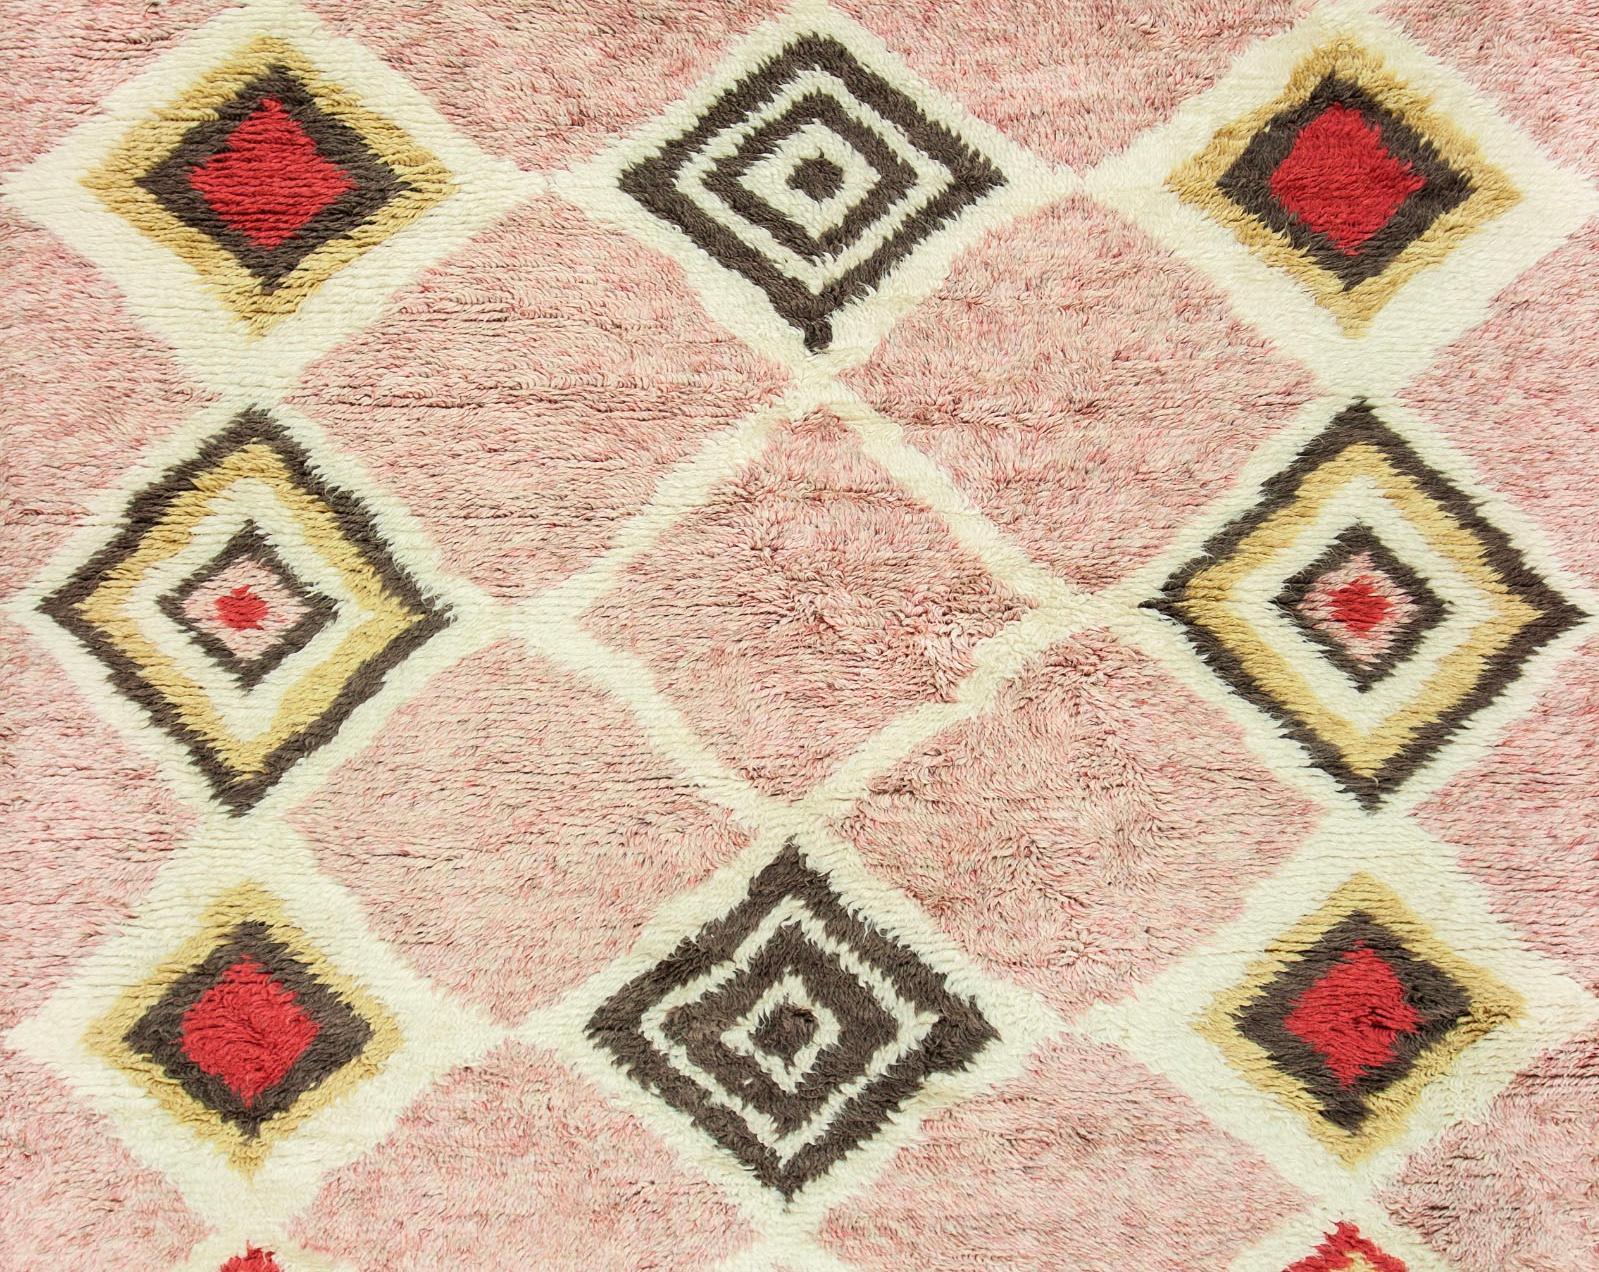 This contemporary Moroccan style pink and ivory rug features a geometric diamond pattern in triangles of gold, brown and red and is fringed on two ends. This highly durable rug with a plush heathery, colored pile is hand knotted from the finest wool